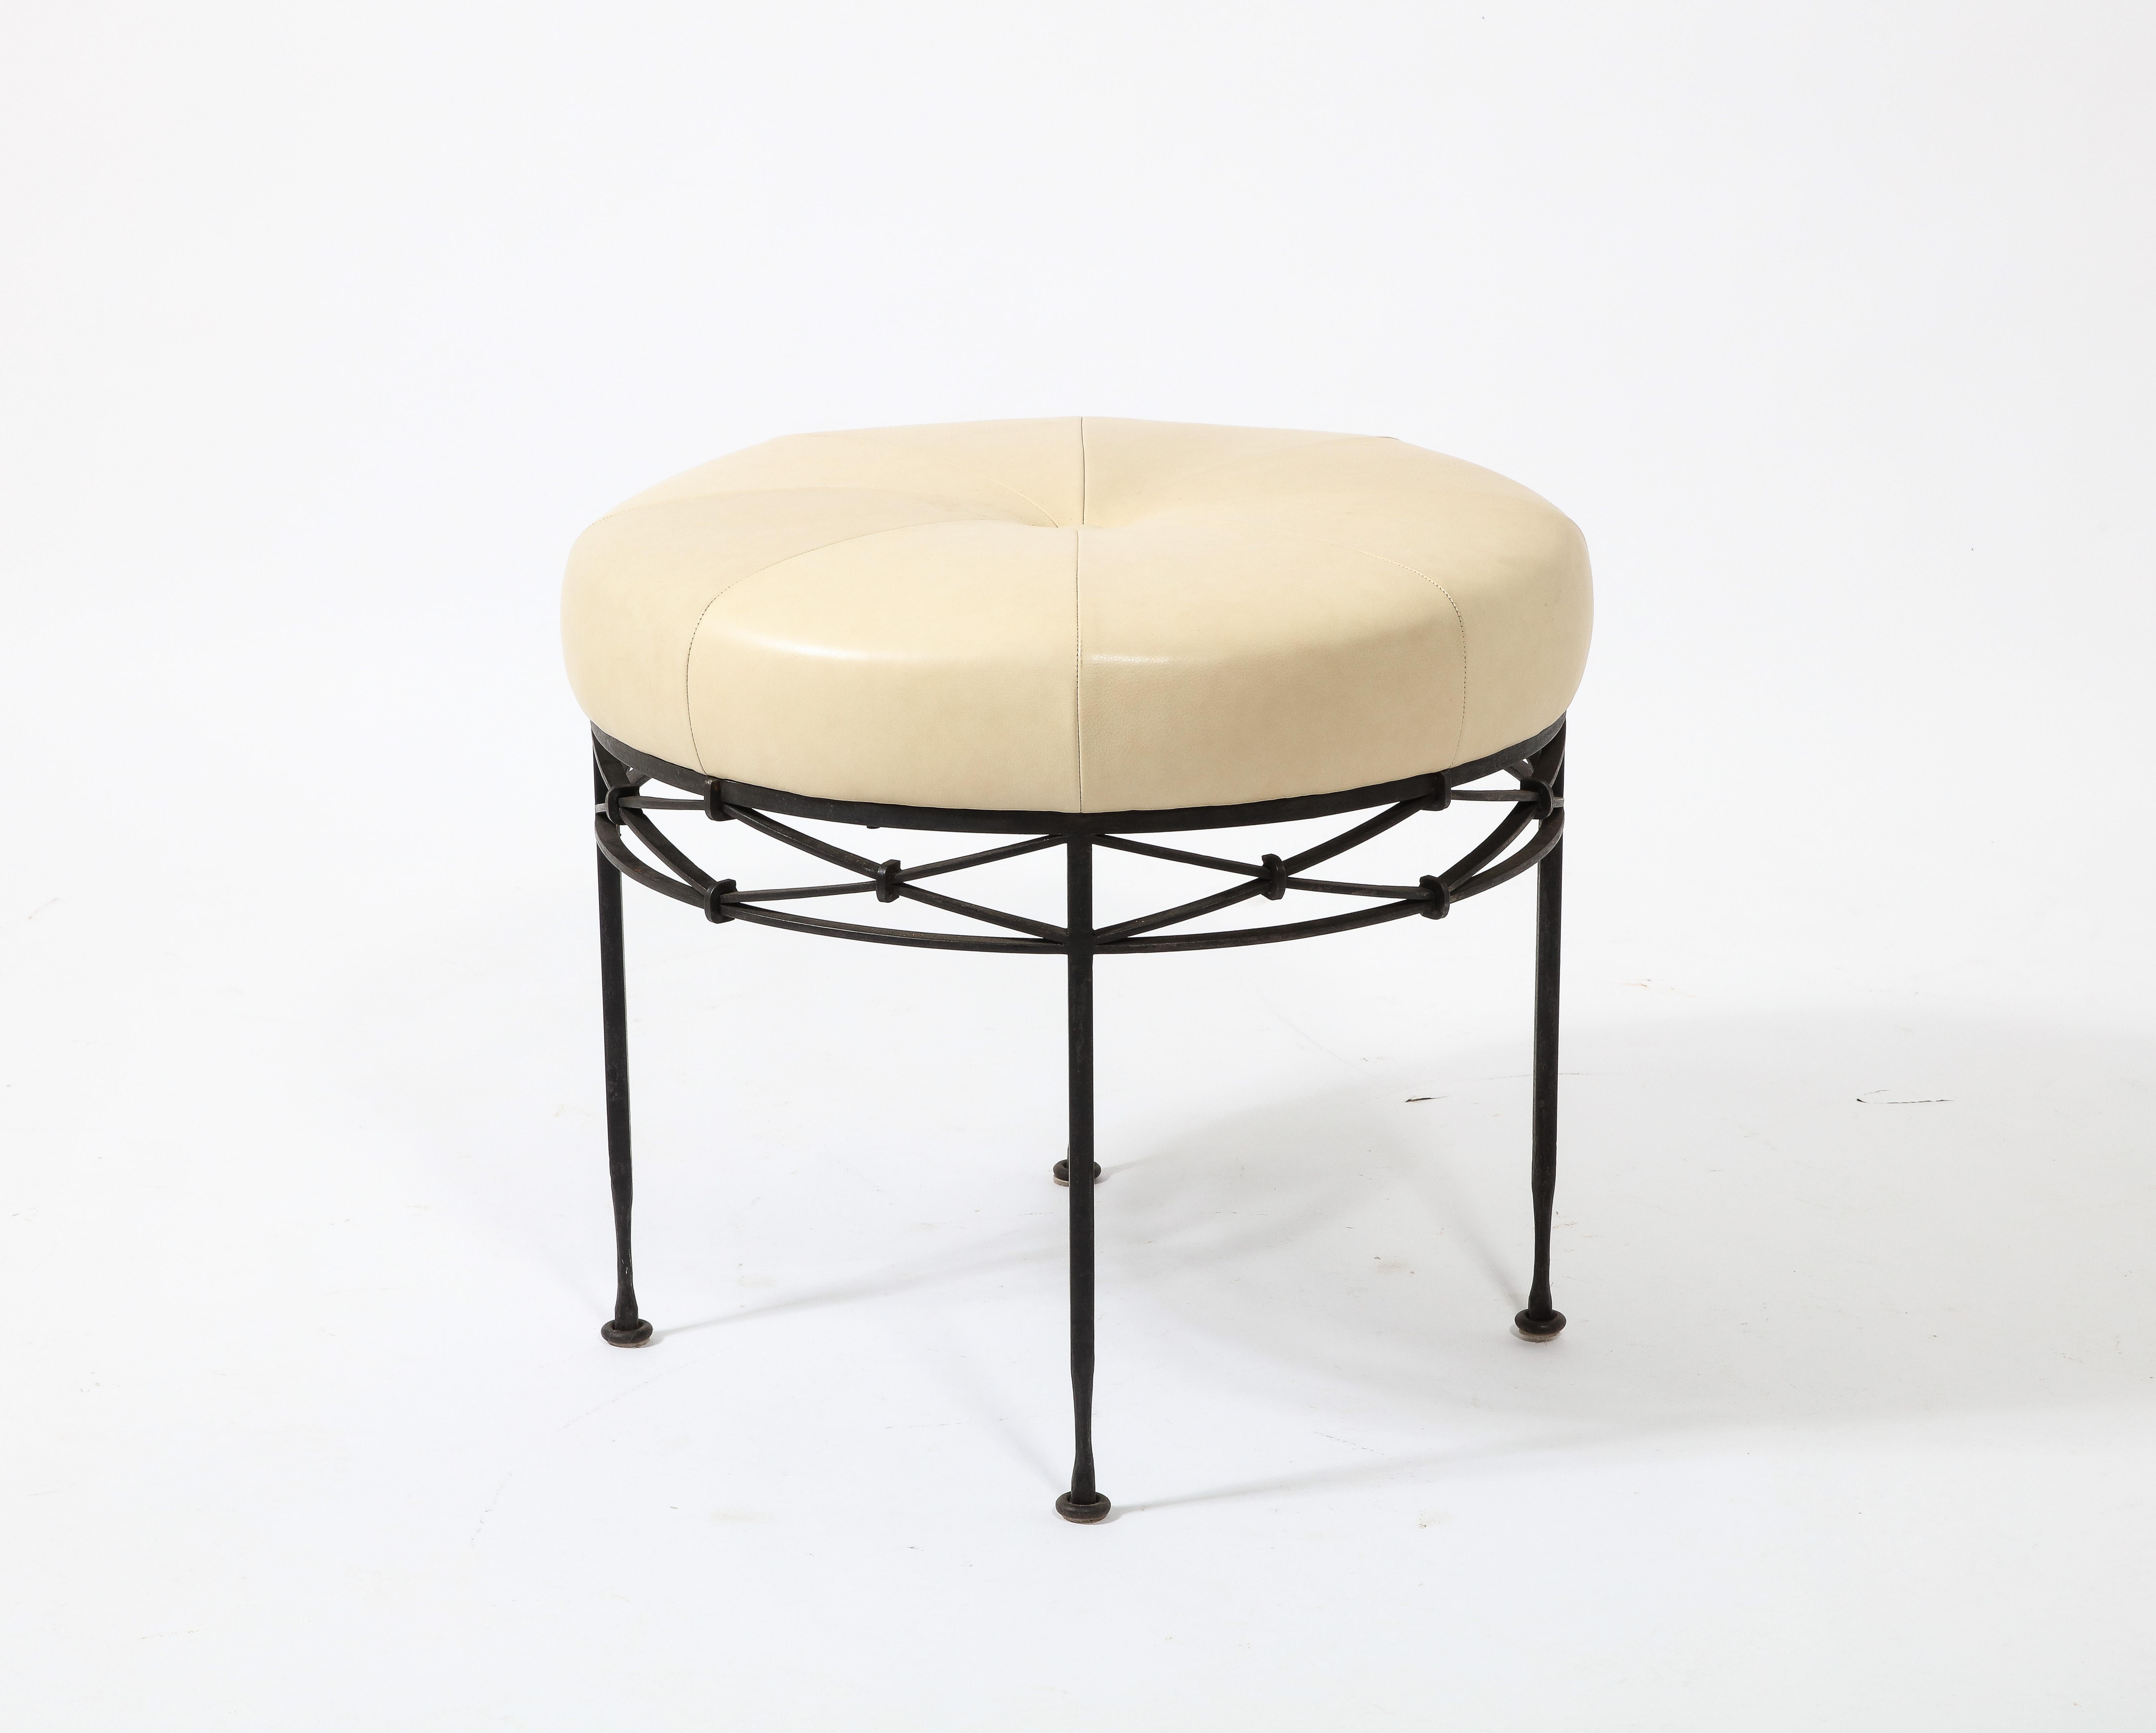 20th Century Wrought Iron & Leather Stool, France 1950's For Sale